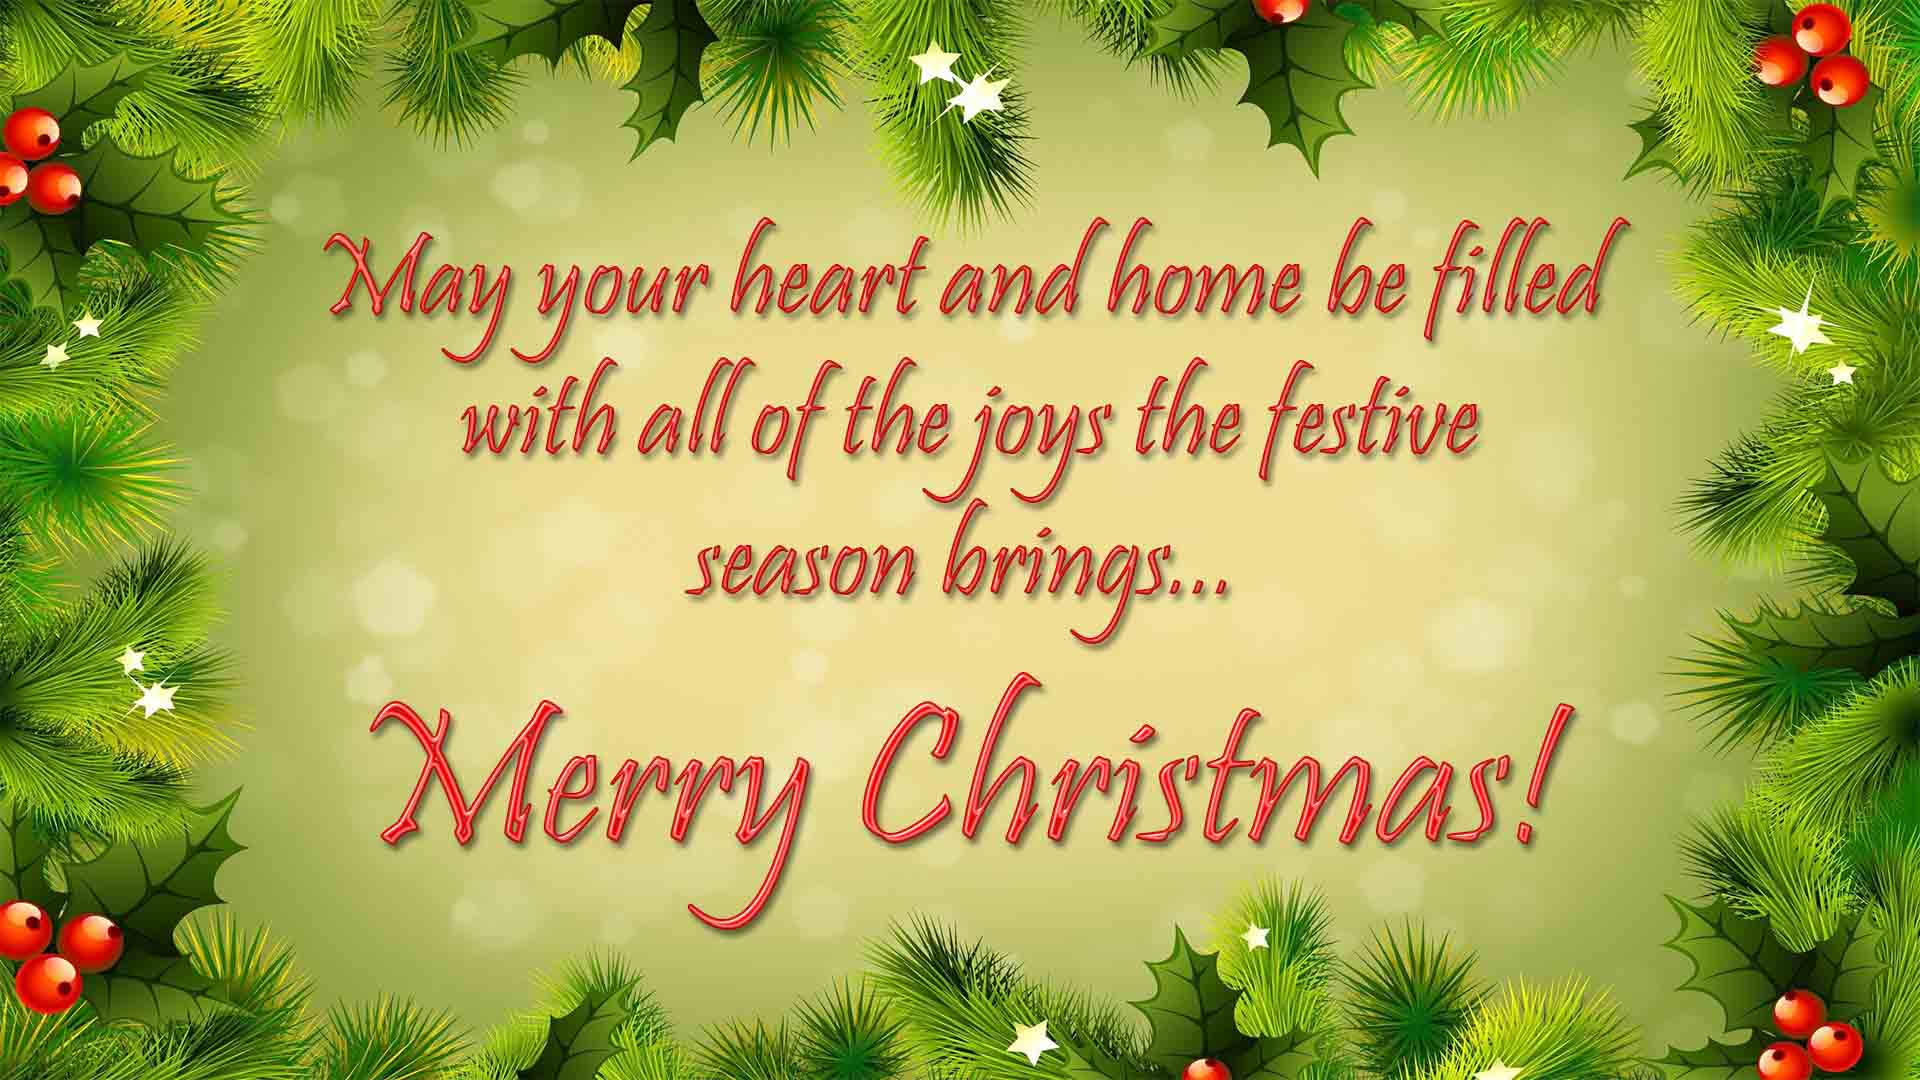 112+ Christmas Greetings Images Hd free Download - MyWeb